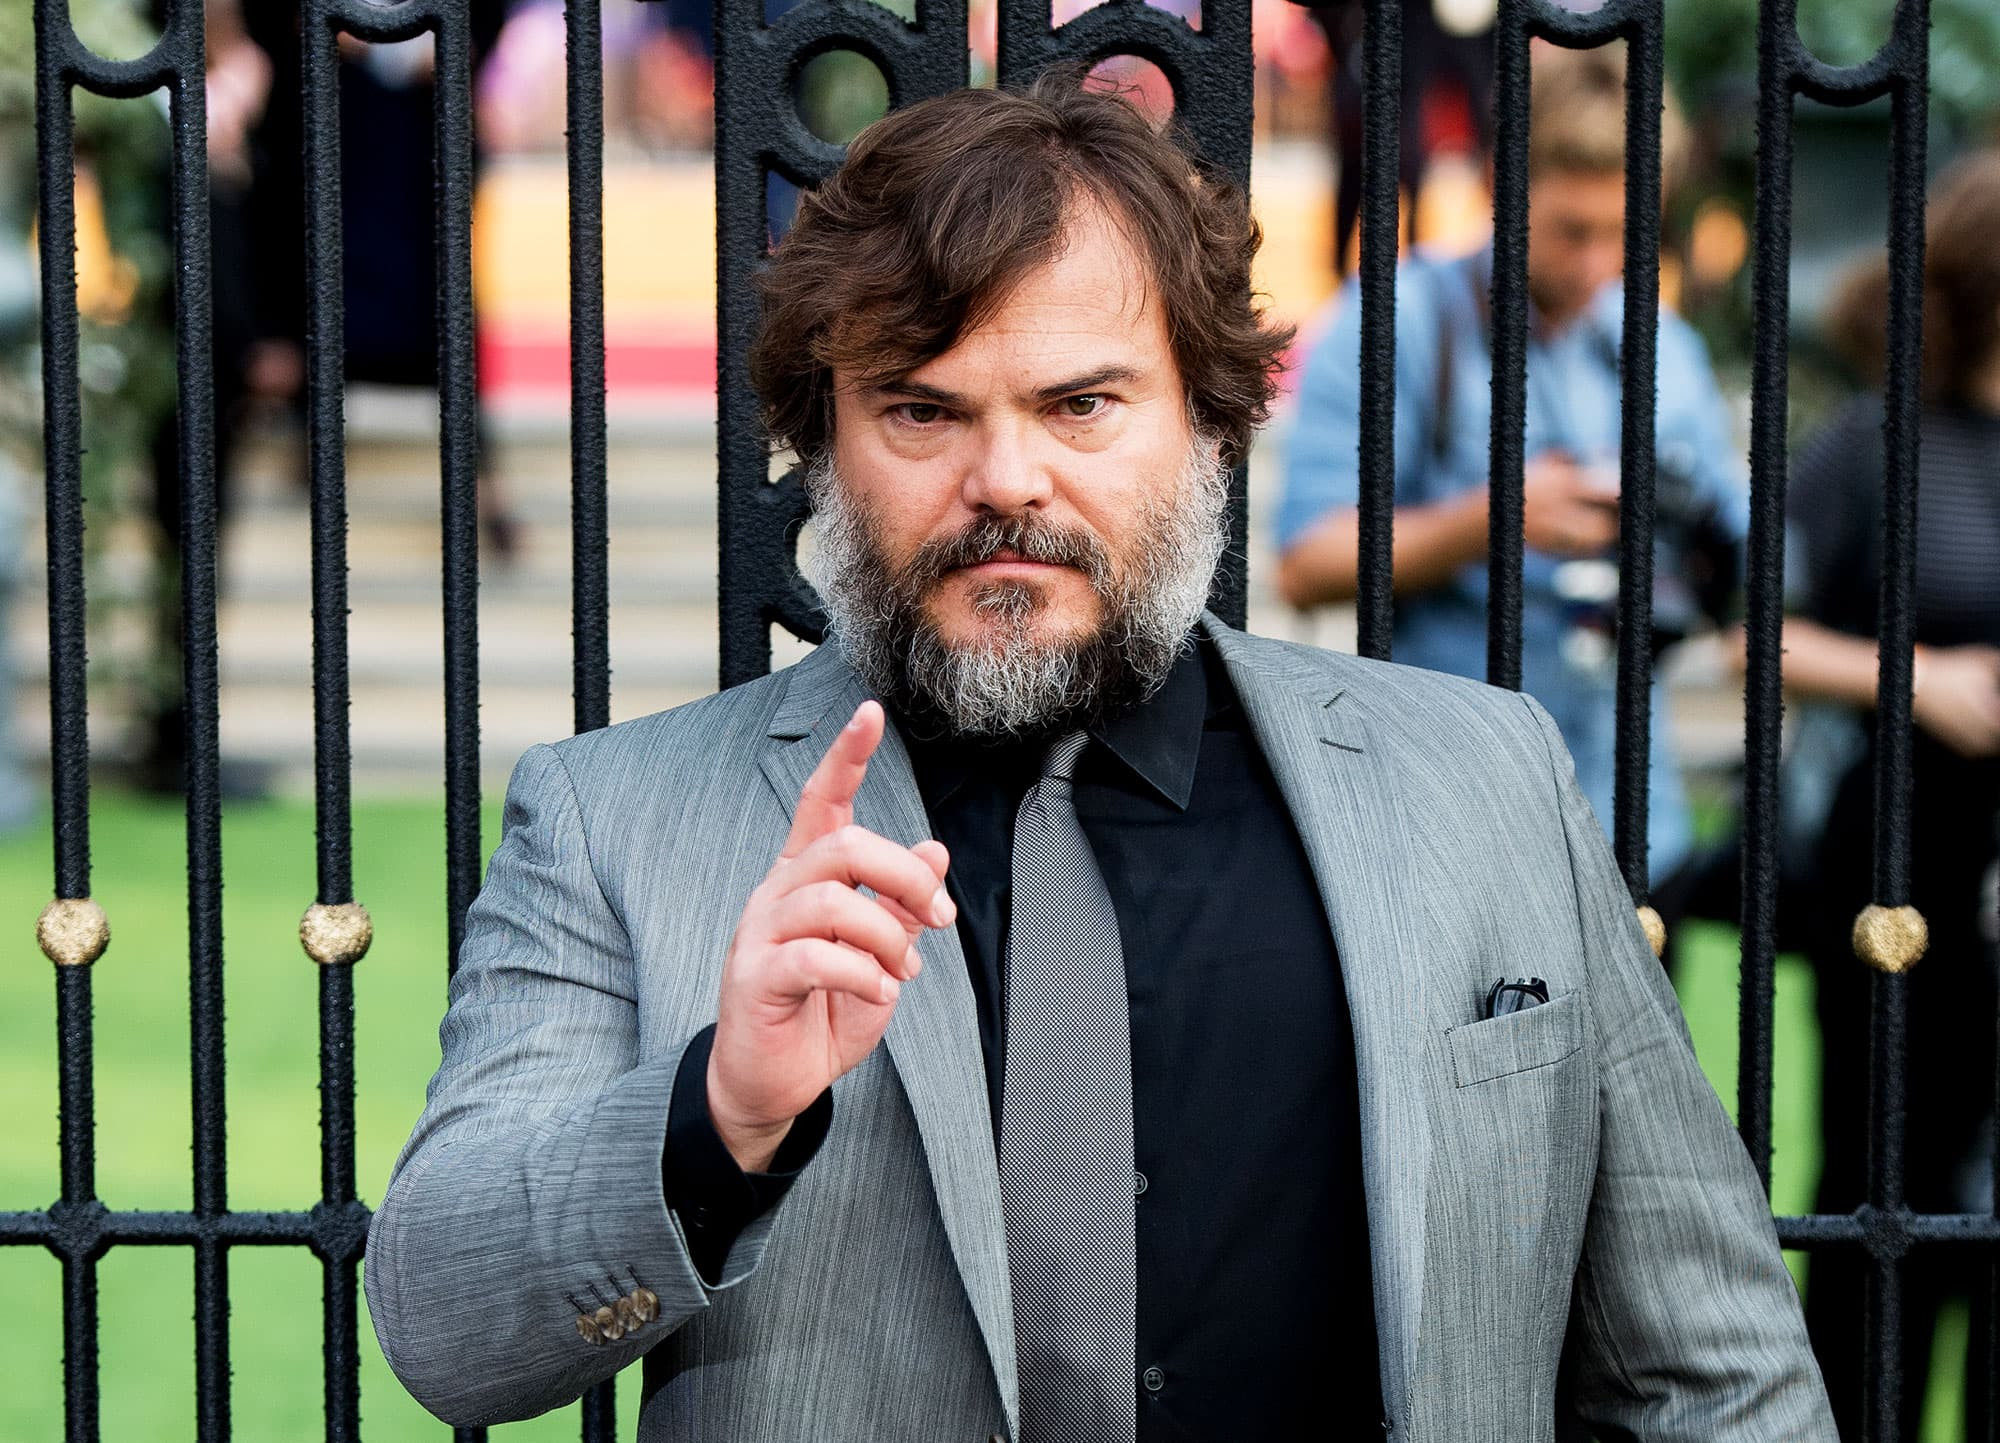 Reignite your love for Jack Black Rewatch these hilarious movies now